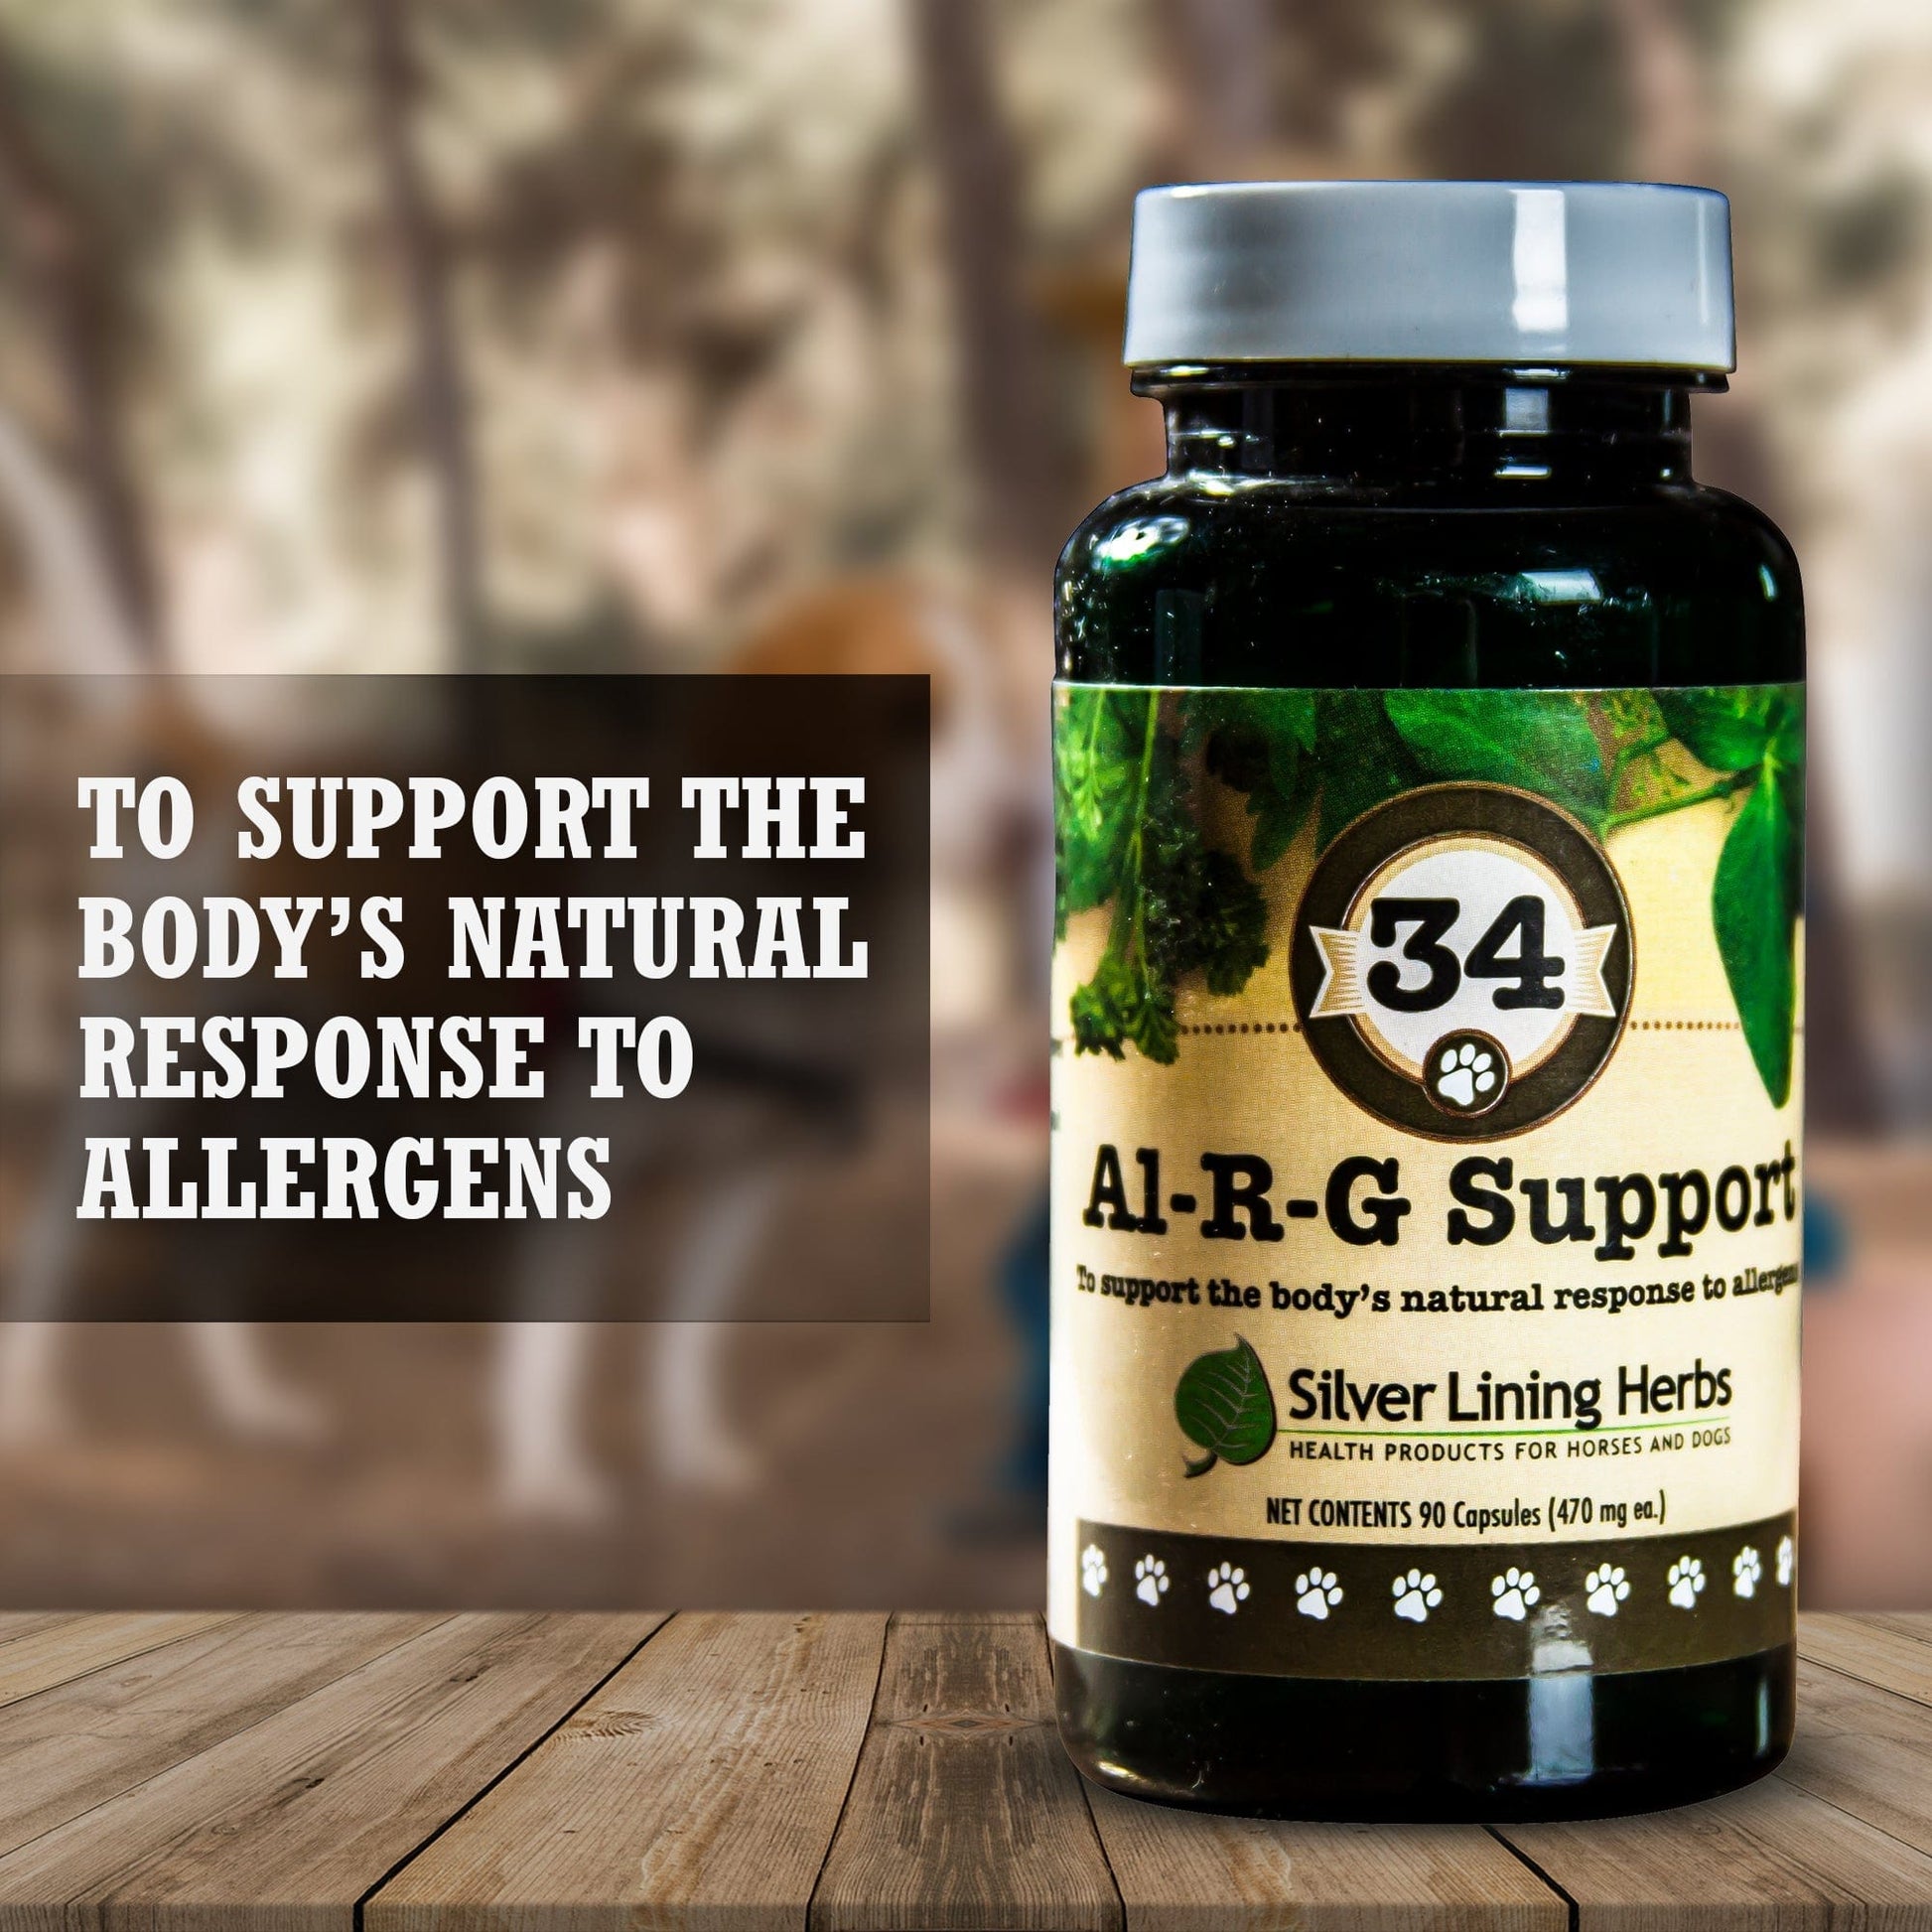 Al-R-G Support for Dogs - Silver Lining Herbs